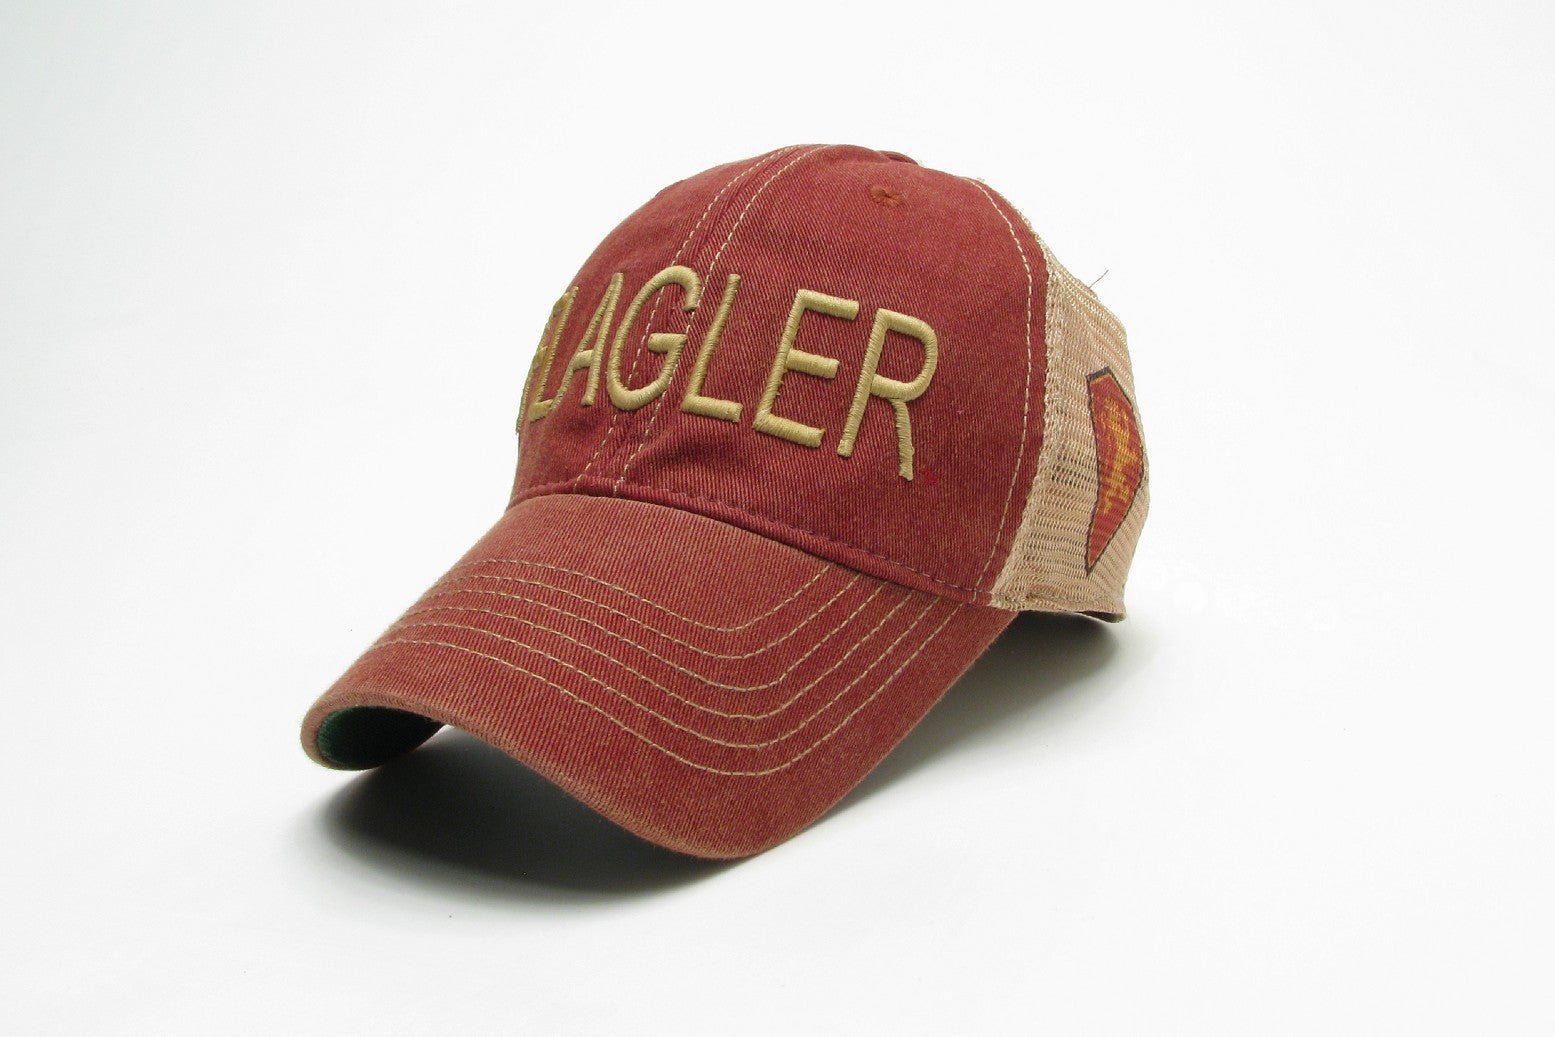 red hat with dirty effect with beige mesh back. Beige embroider saying Flagler and flagler college shield logo on the side of mesh